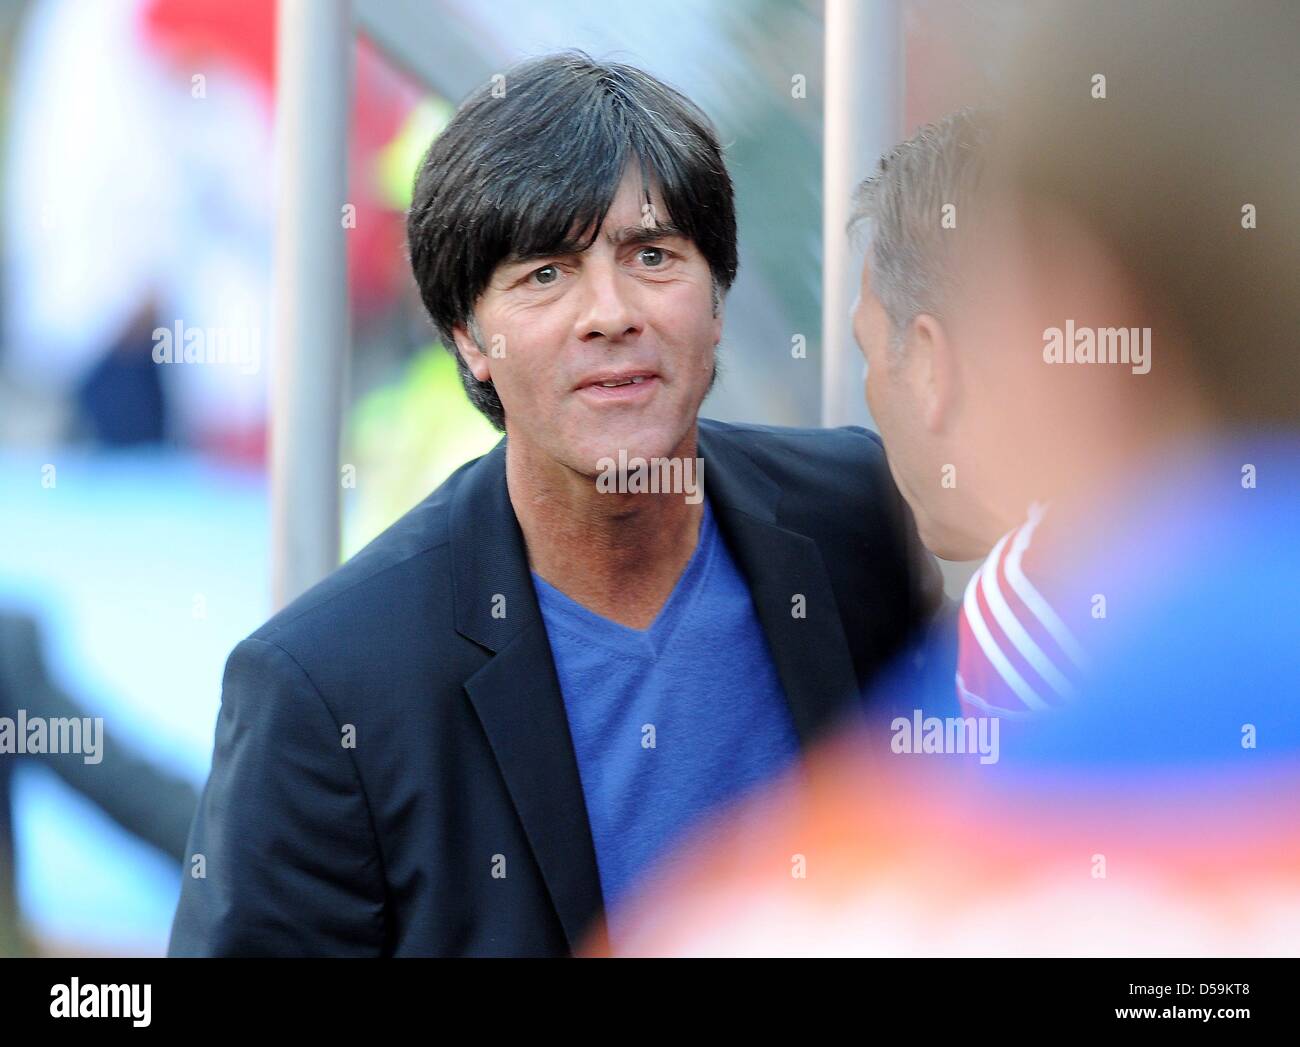 German coach Joachim Loew during the 2010 FIFA World Cup Round of Sixteen match between Germany and England at the Free State Stadium in Bloemfontein, South Africa 27 June 2010. Photo: Marcus Brandt dpa - Please refer to http://dpaq.de/FIFA-WM2010-TC  +++(c) dpa - Bildfunk+++ Stock Photo